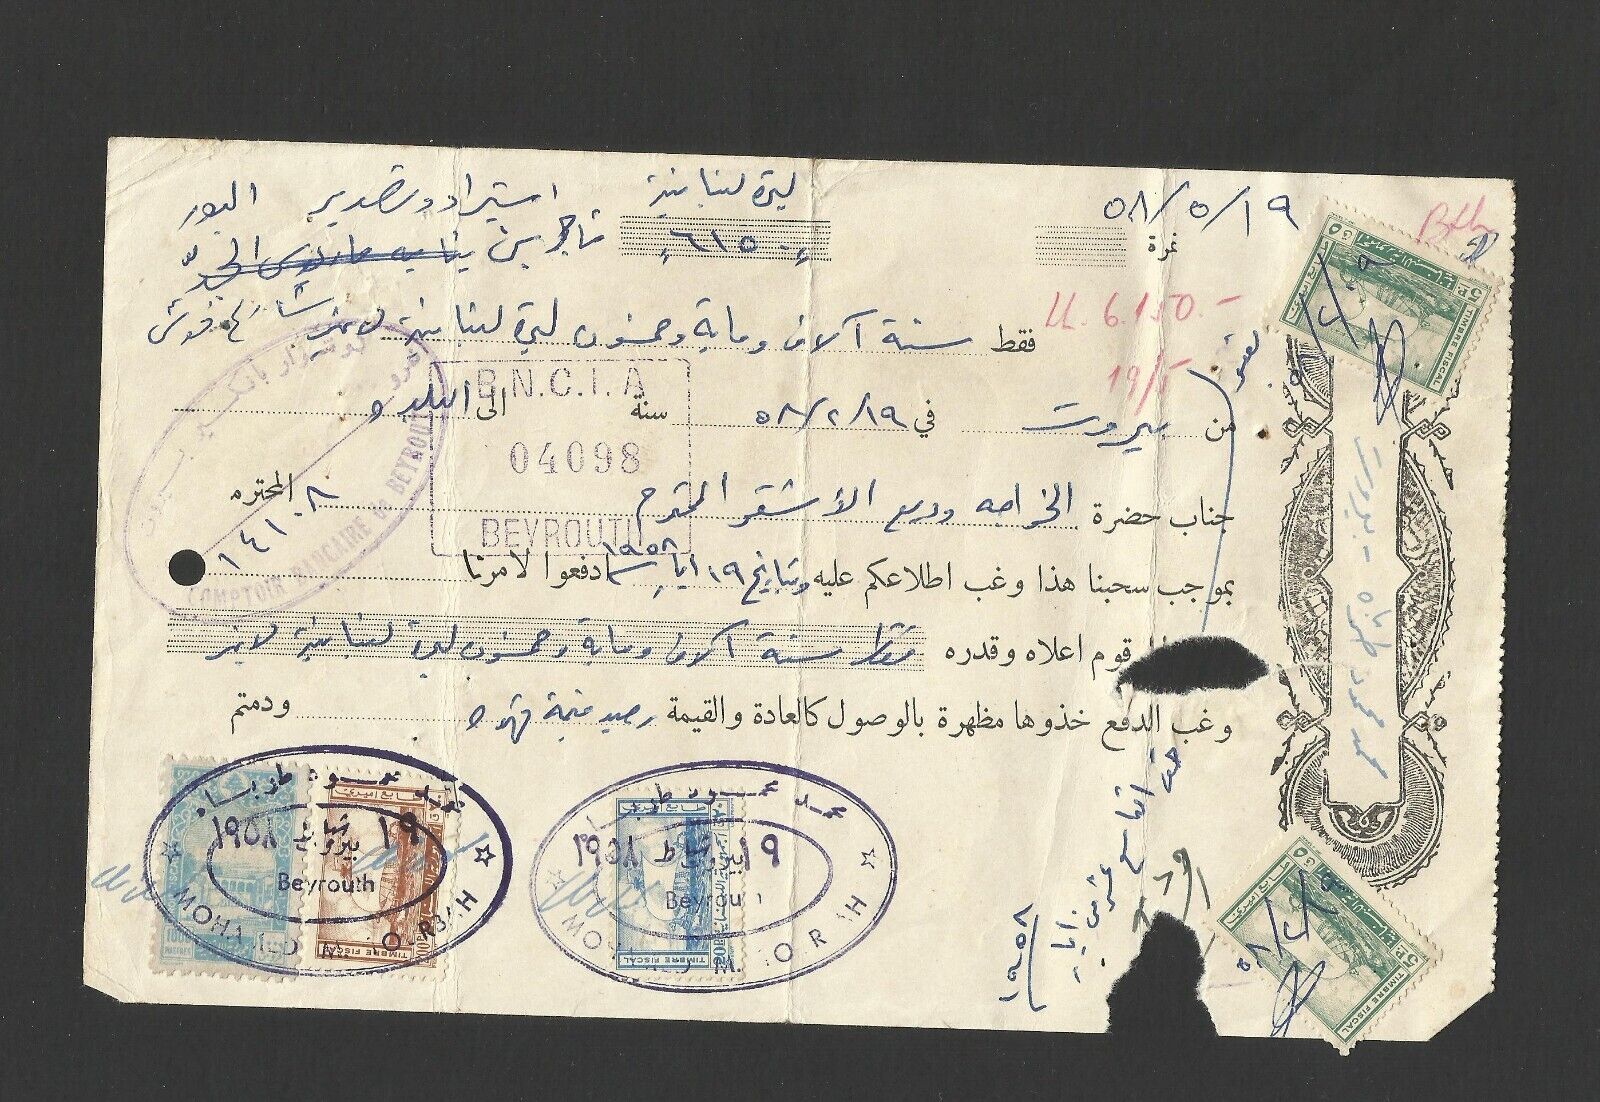 Lebanon 1958 Private Payment Voucher Including 1000 Pi Revenue Stamp See Scan